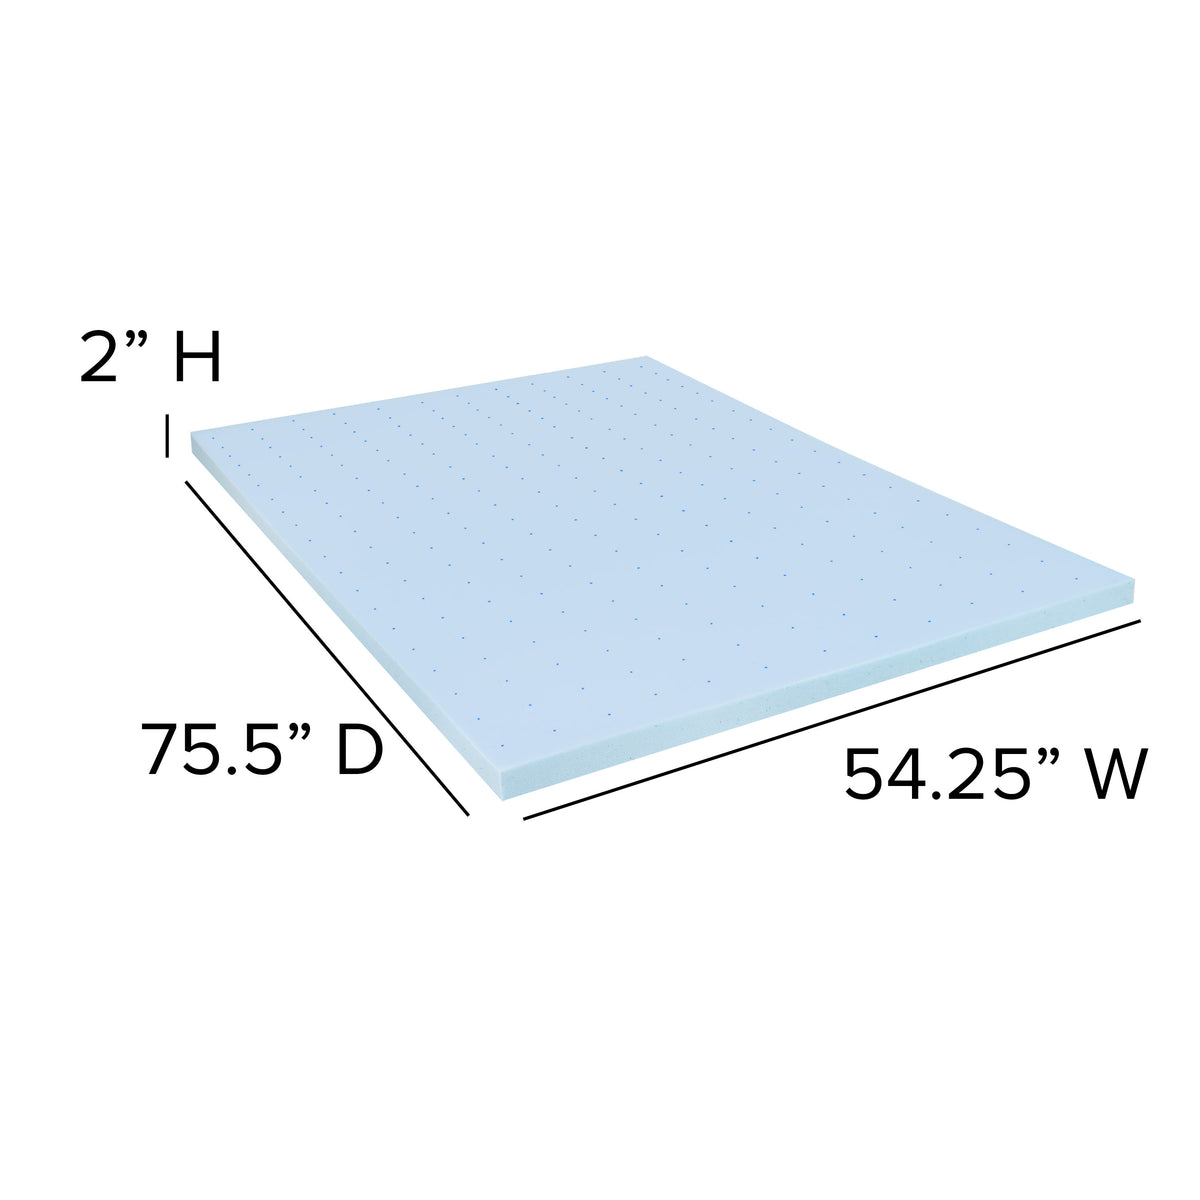 Full |#| 2inch Cool Gel Infused Hypoallergenic Cooling Memory Foam Mattress Topper - Full